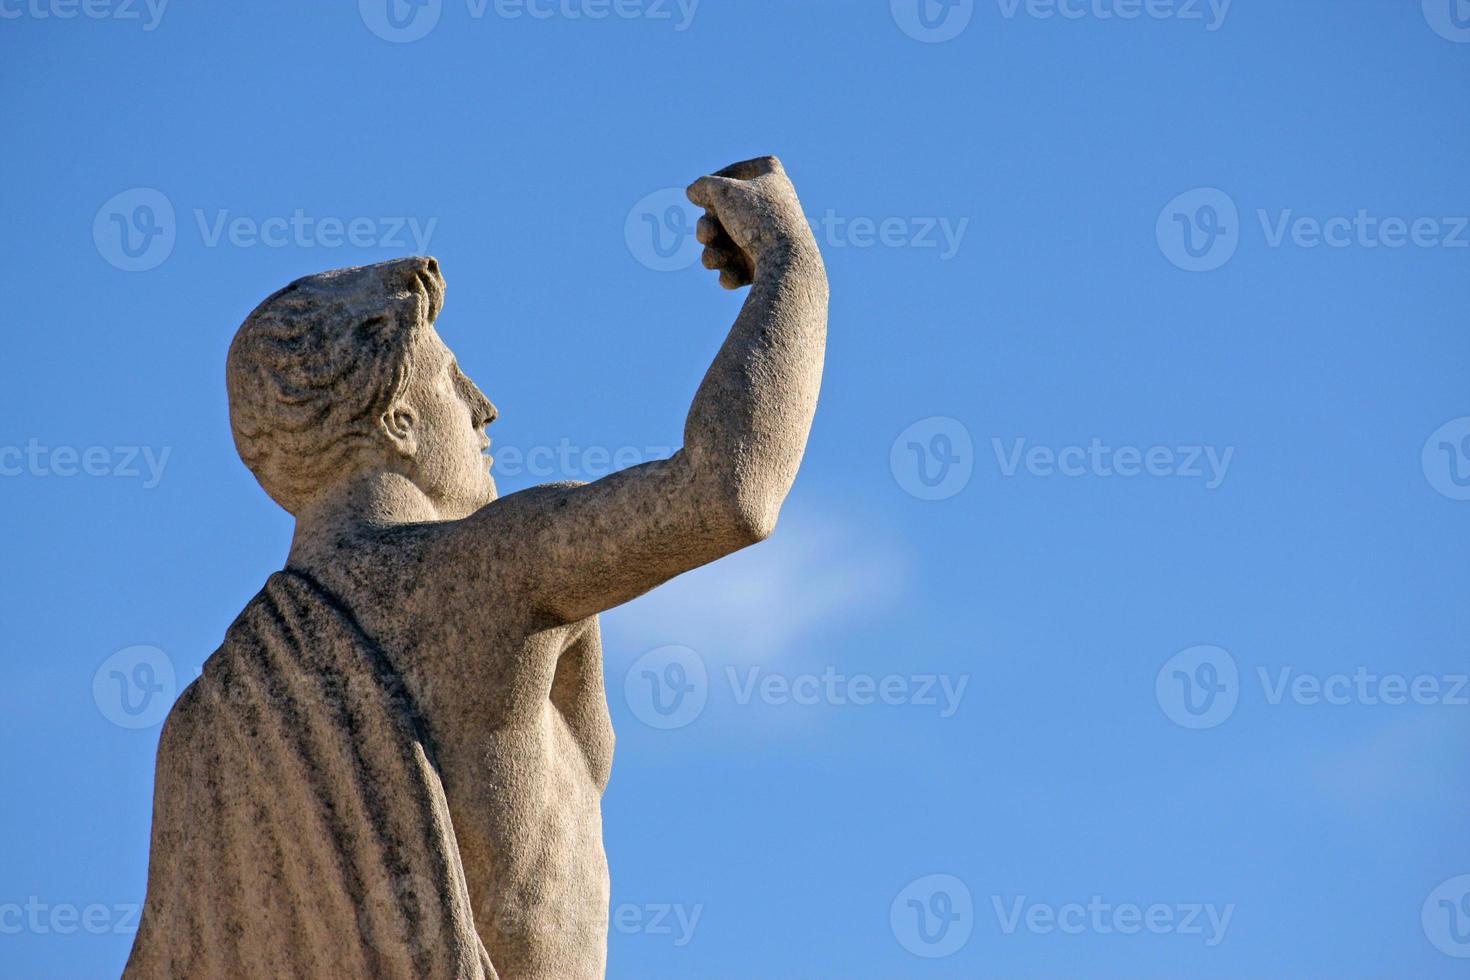 Statue with raised fist on the Cathedral of Milan photo